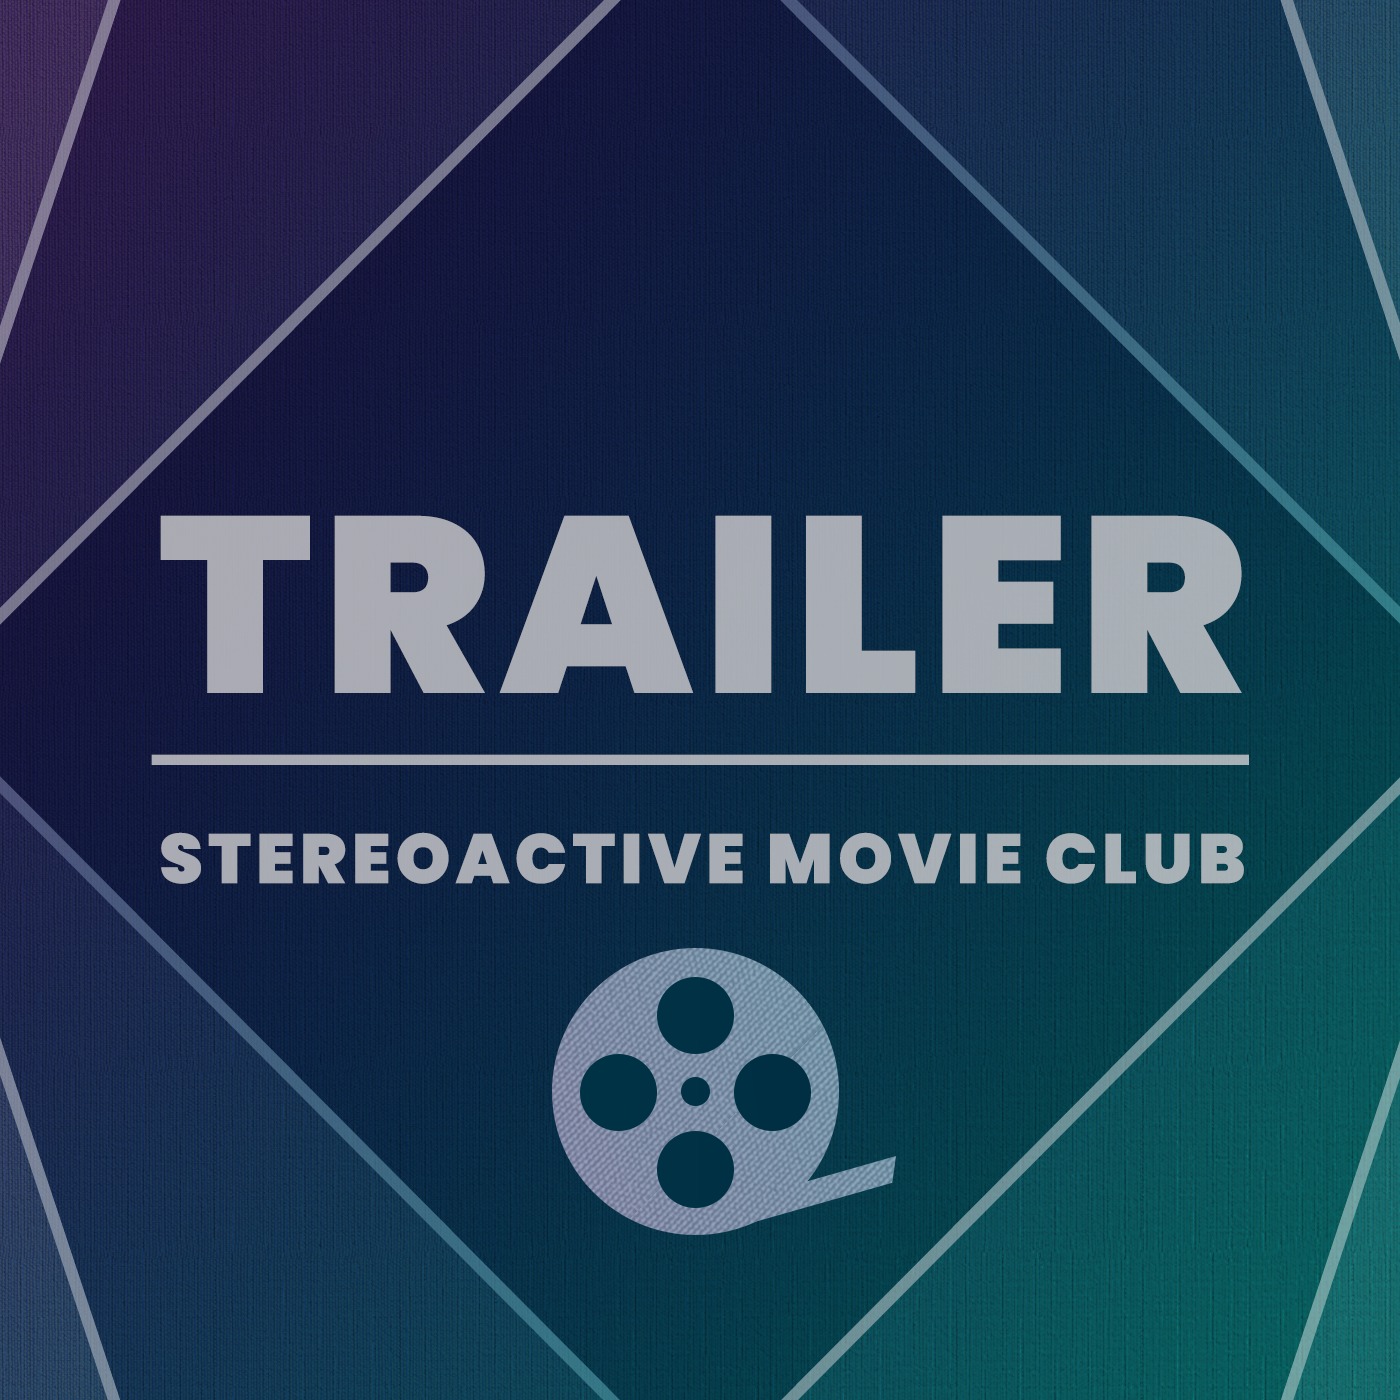 Stereoactive Movie Club Trailer